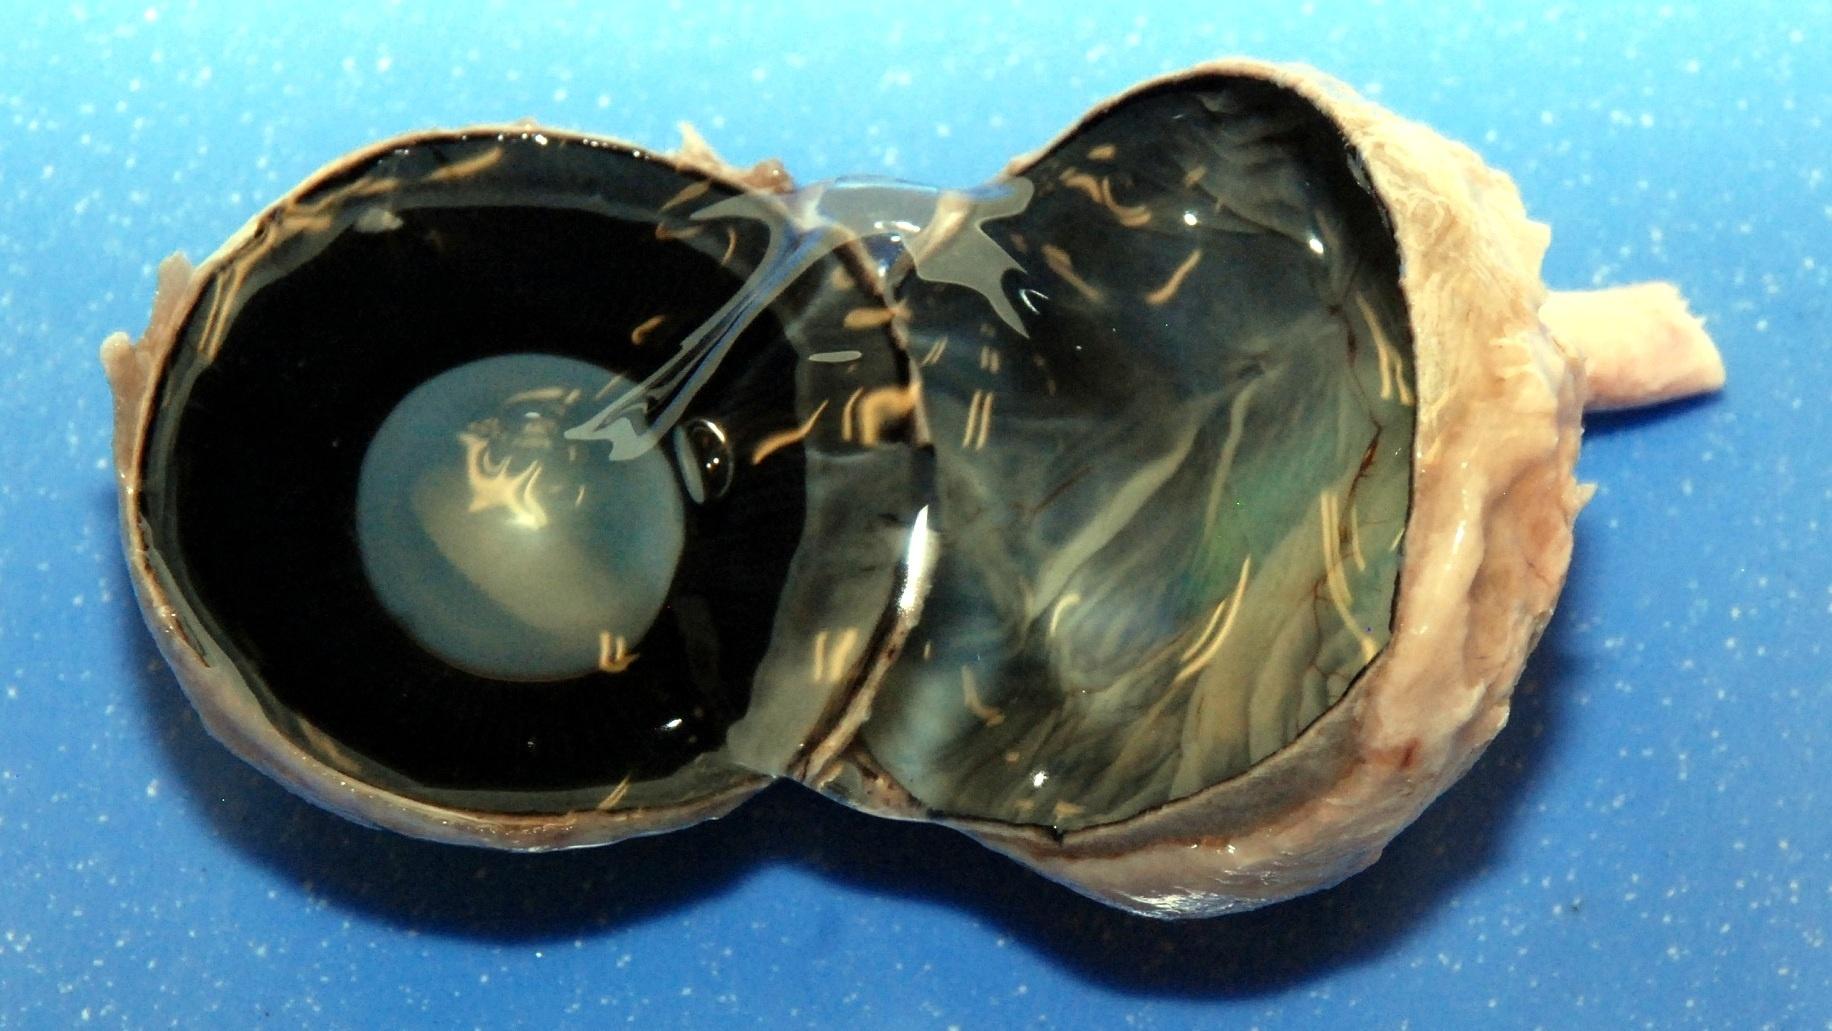 Decorative image for the Dissection 101 series - a dissected cow eyeball is shown.